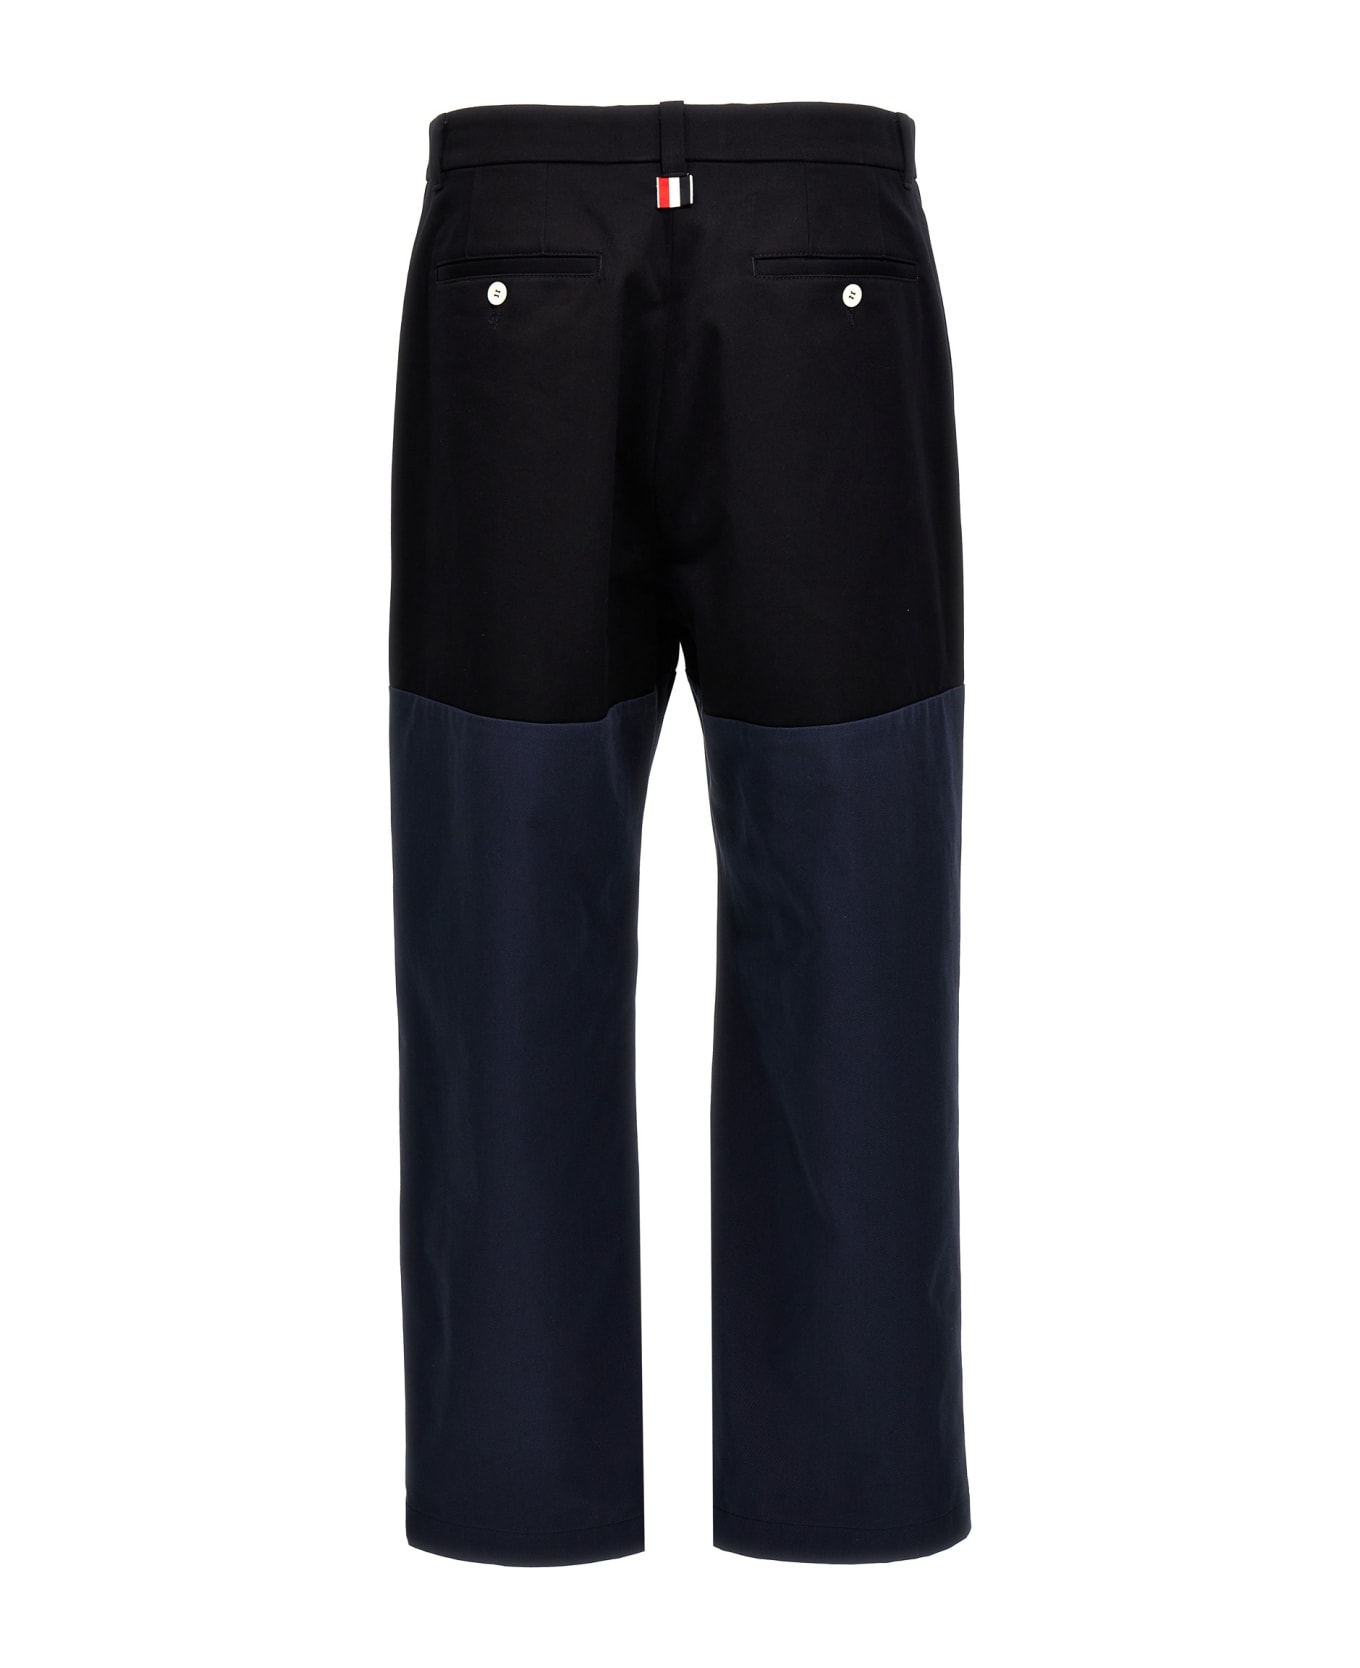 Thom Browne 'unconstructed Combo' Pants - Blue ボトムス